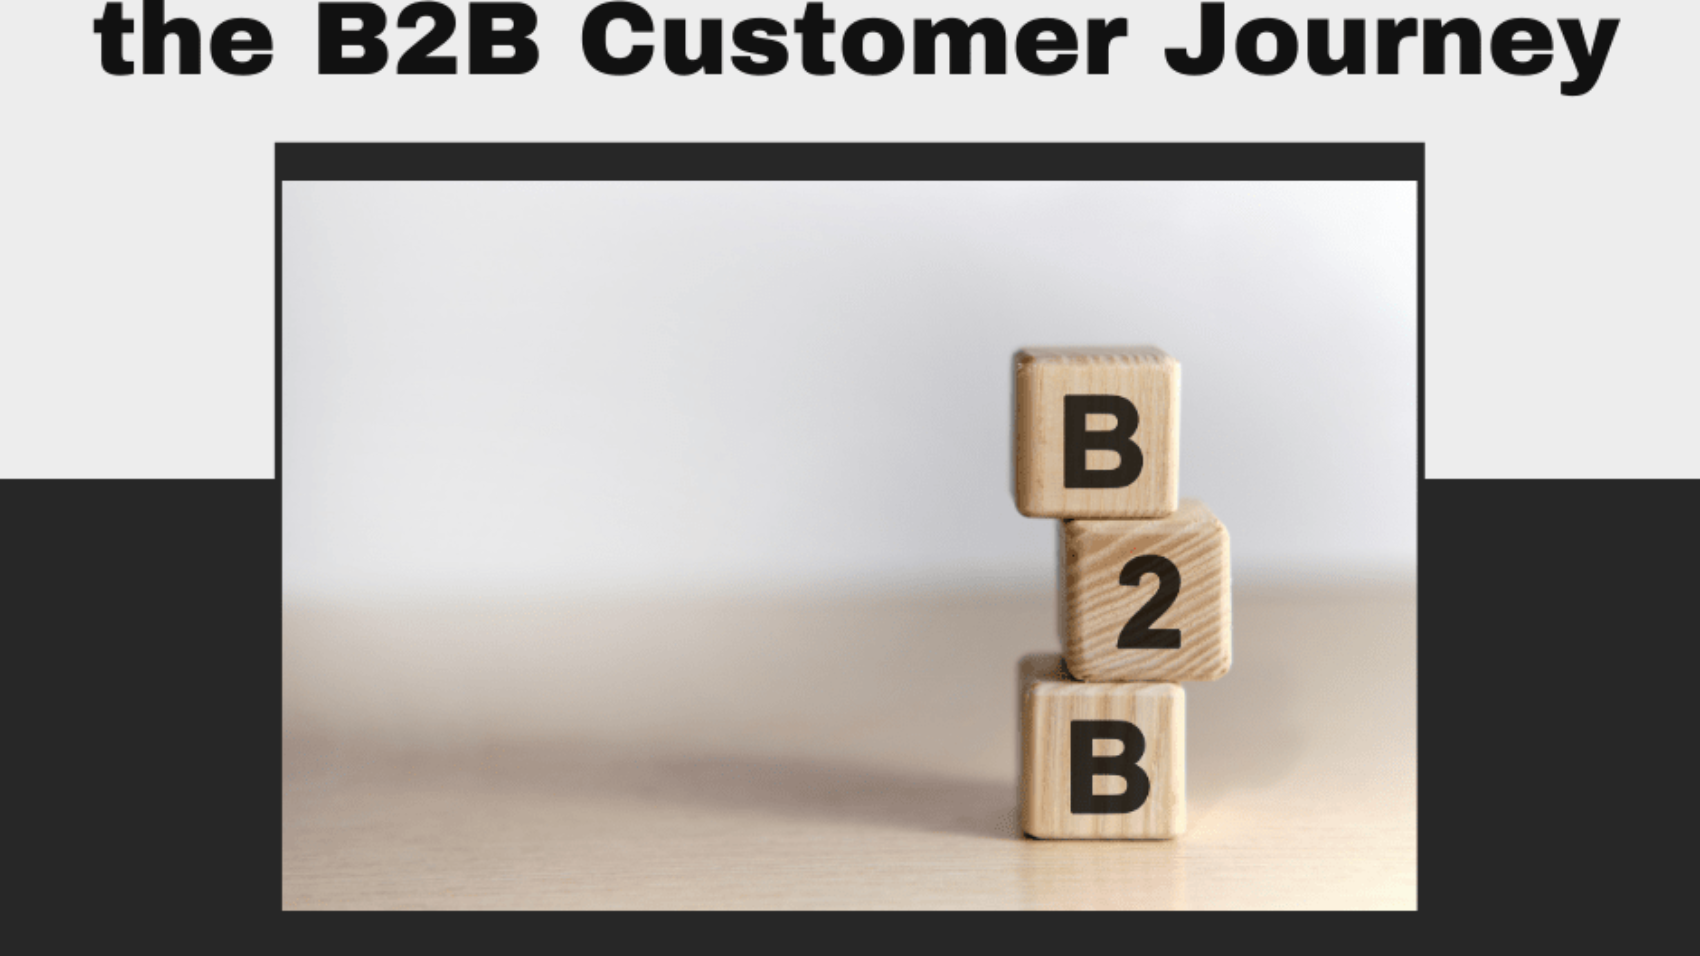 A Comprehensive Guide to the B2B Customer